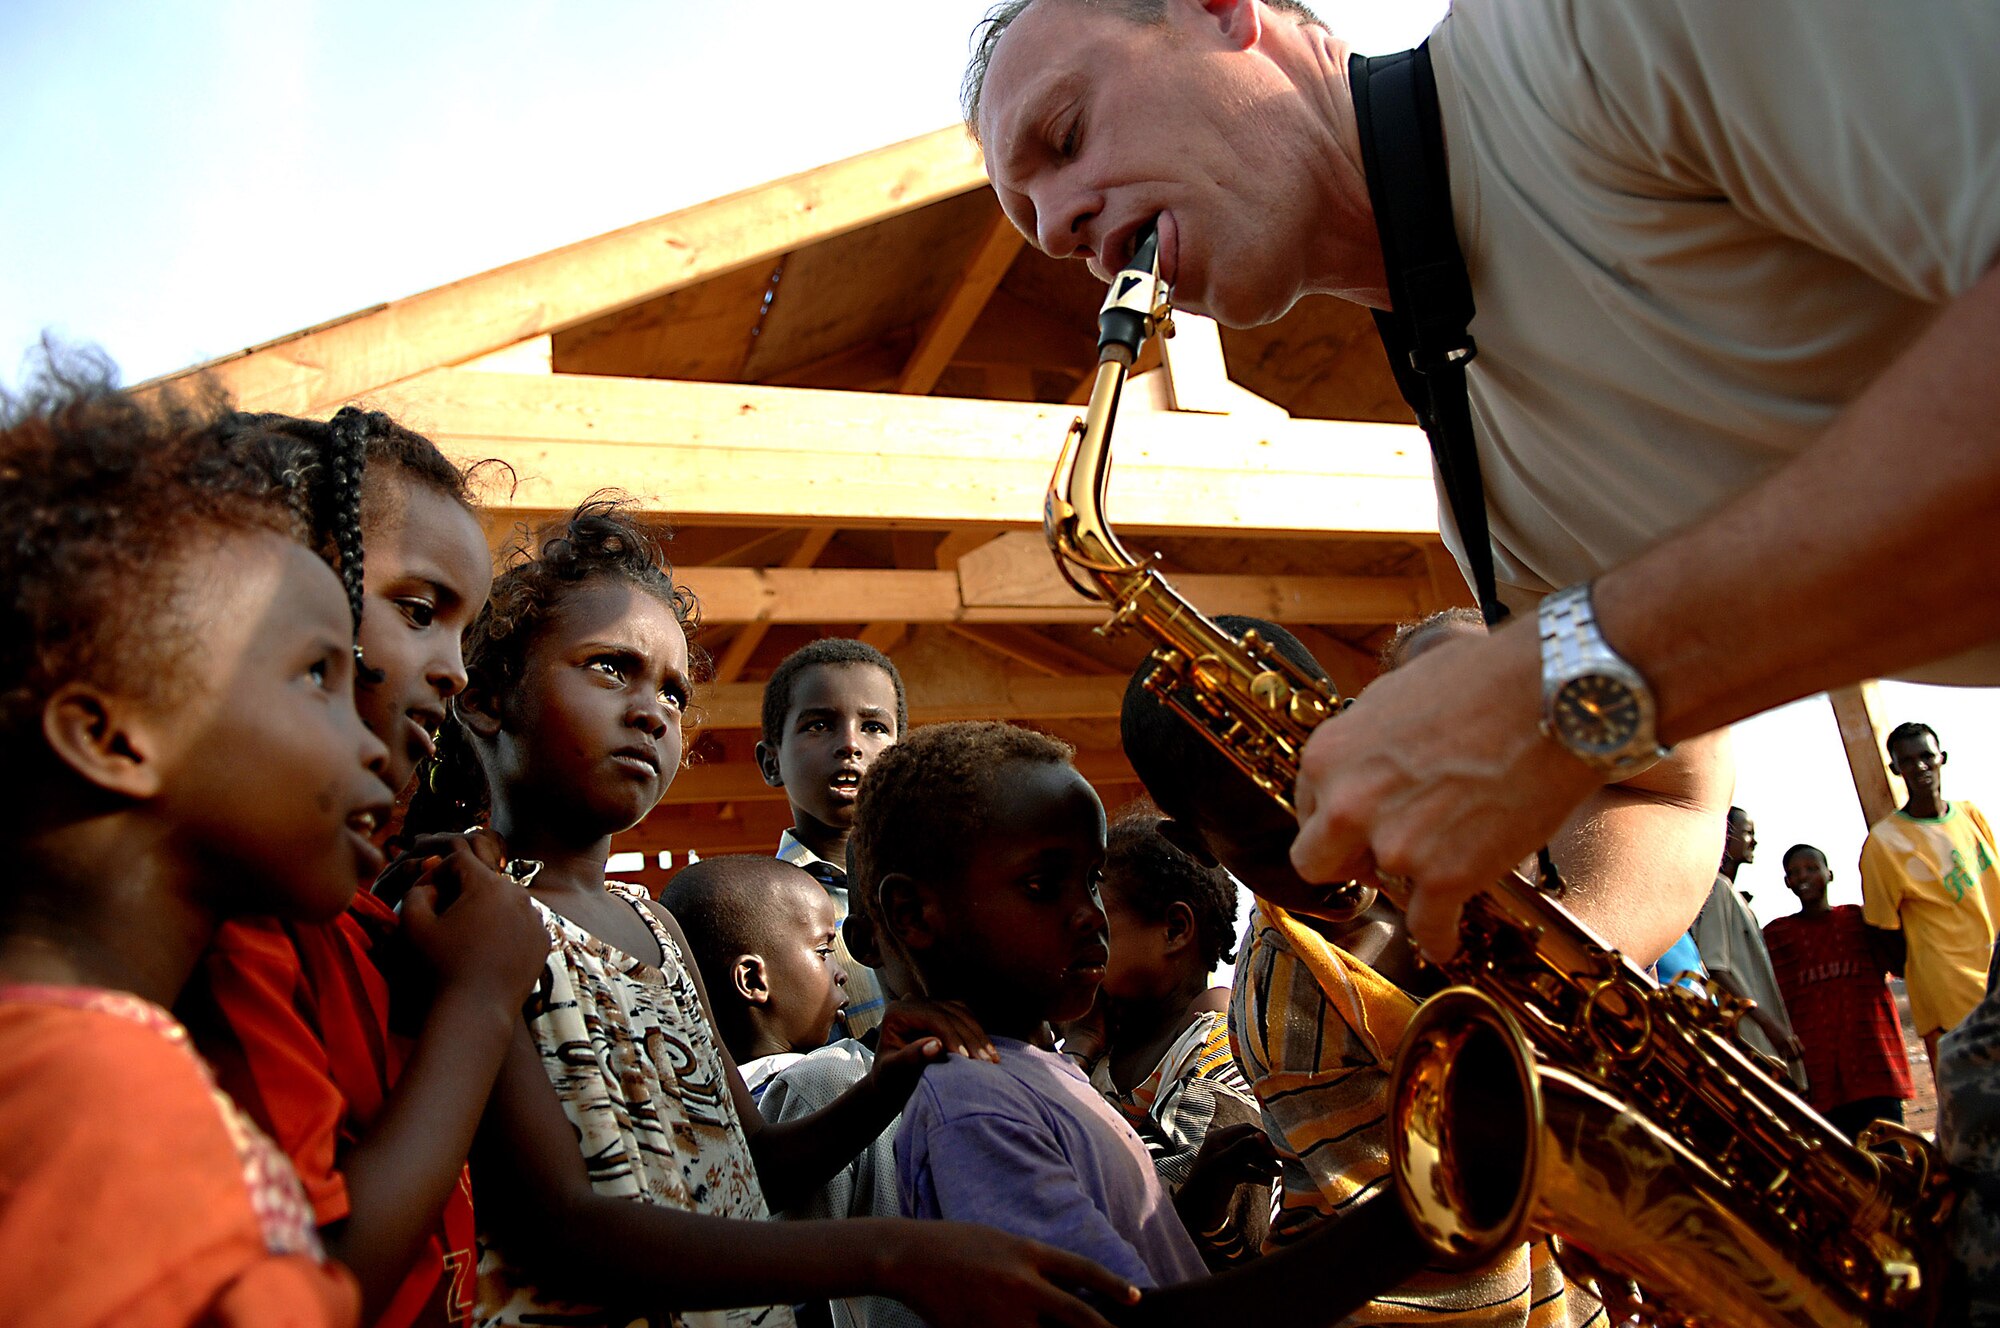 Master Sgt. Daniel Weber performs for villagers May 22 in Negad, Djibouti. The band is deployed to support Combined Joint Task Force - Horn of Africa out of Camp Lemonier, Djibouti. Sergeant Weber is a saxophonist and vocalist with the U.S. Air Force Central Command band, Falcon.  (U.S. Air Force photo/Tech. Sgt. Jeremy T. Lock)